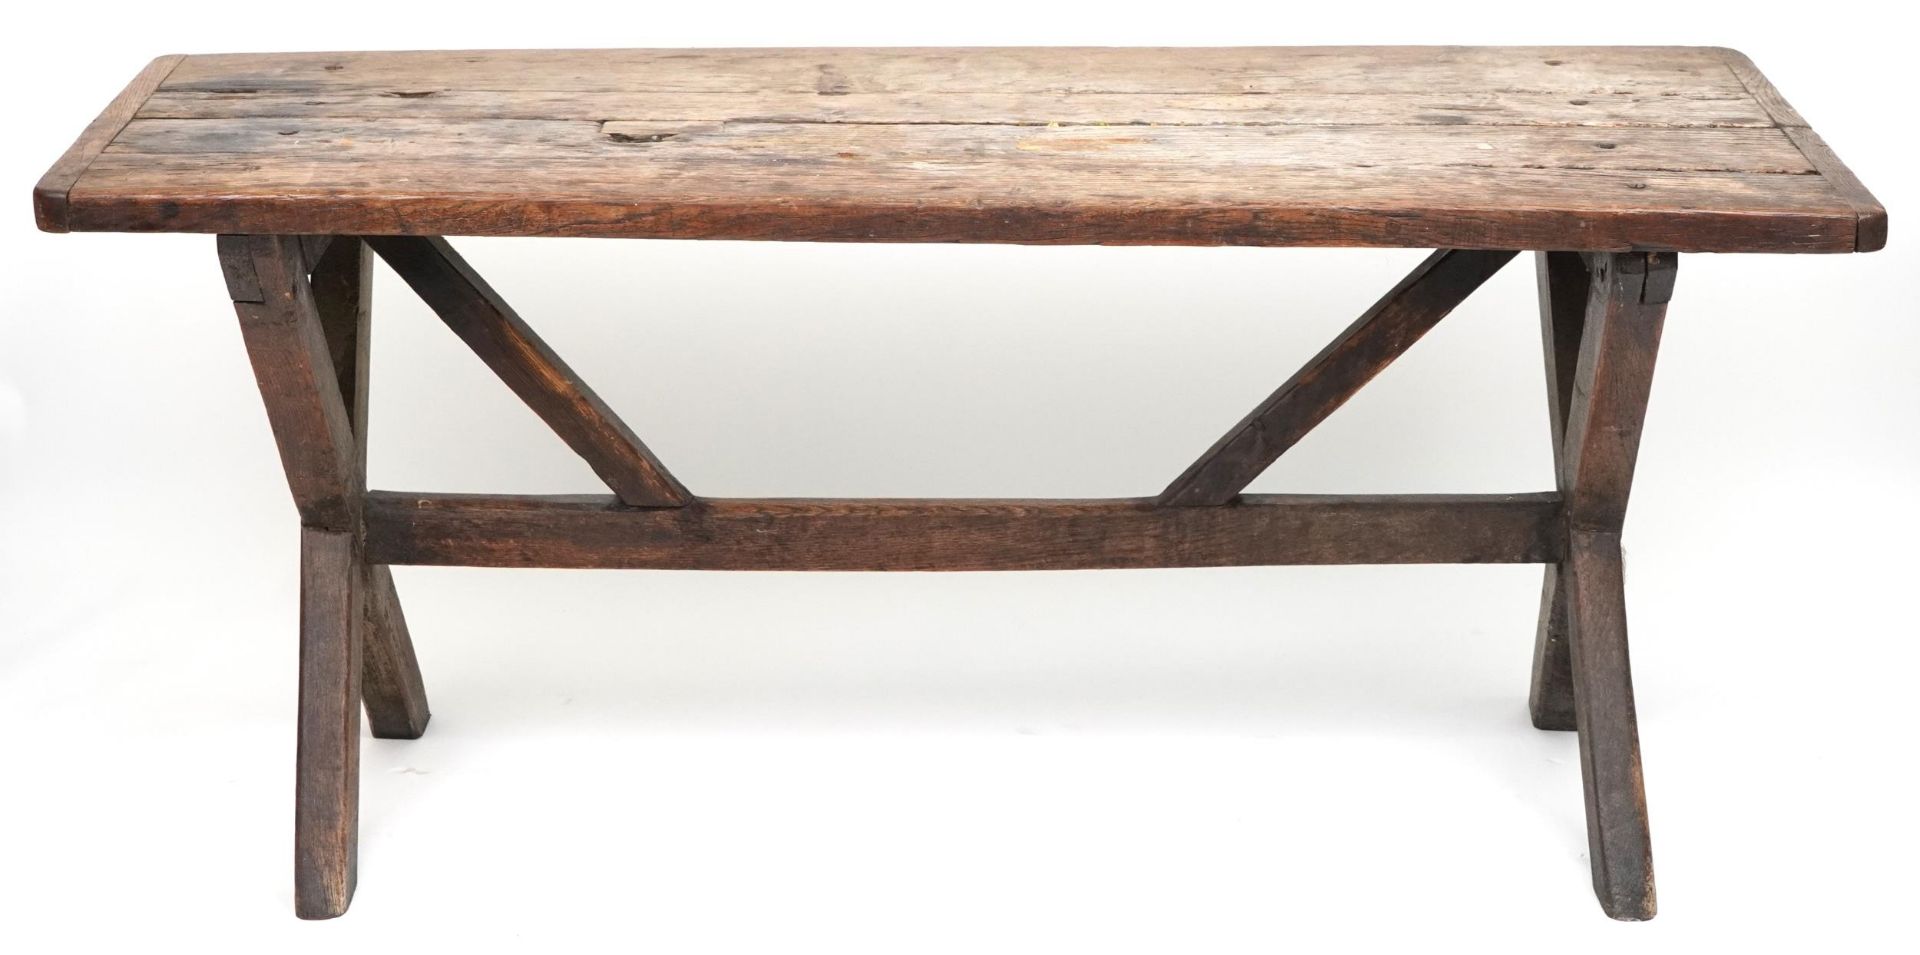 Industrial hardwood dining table with X stretcher, 71cm H x 157cm W x 60cm D - Image 4 of 4